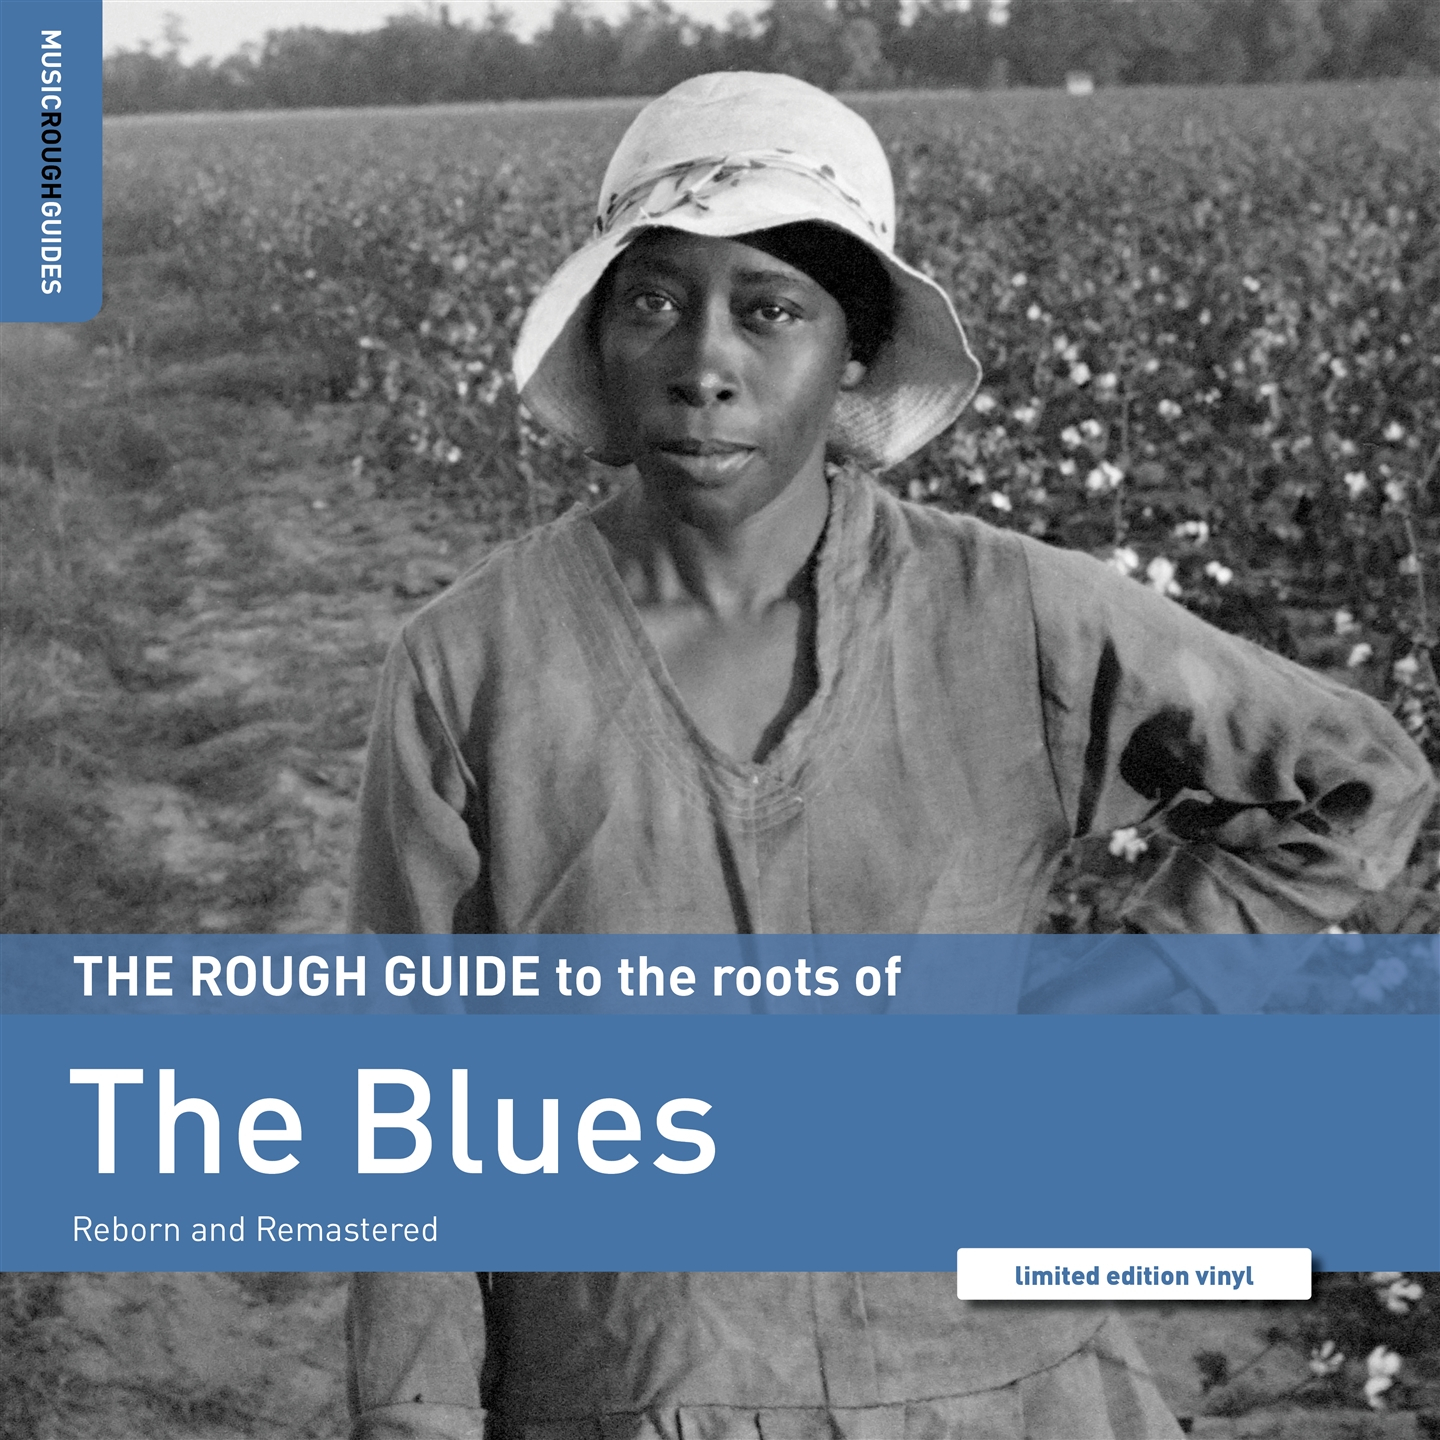 THE ROUGH GUIDE TO THE ROOTS OF THE BLUES [LP]